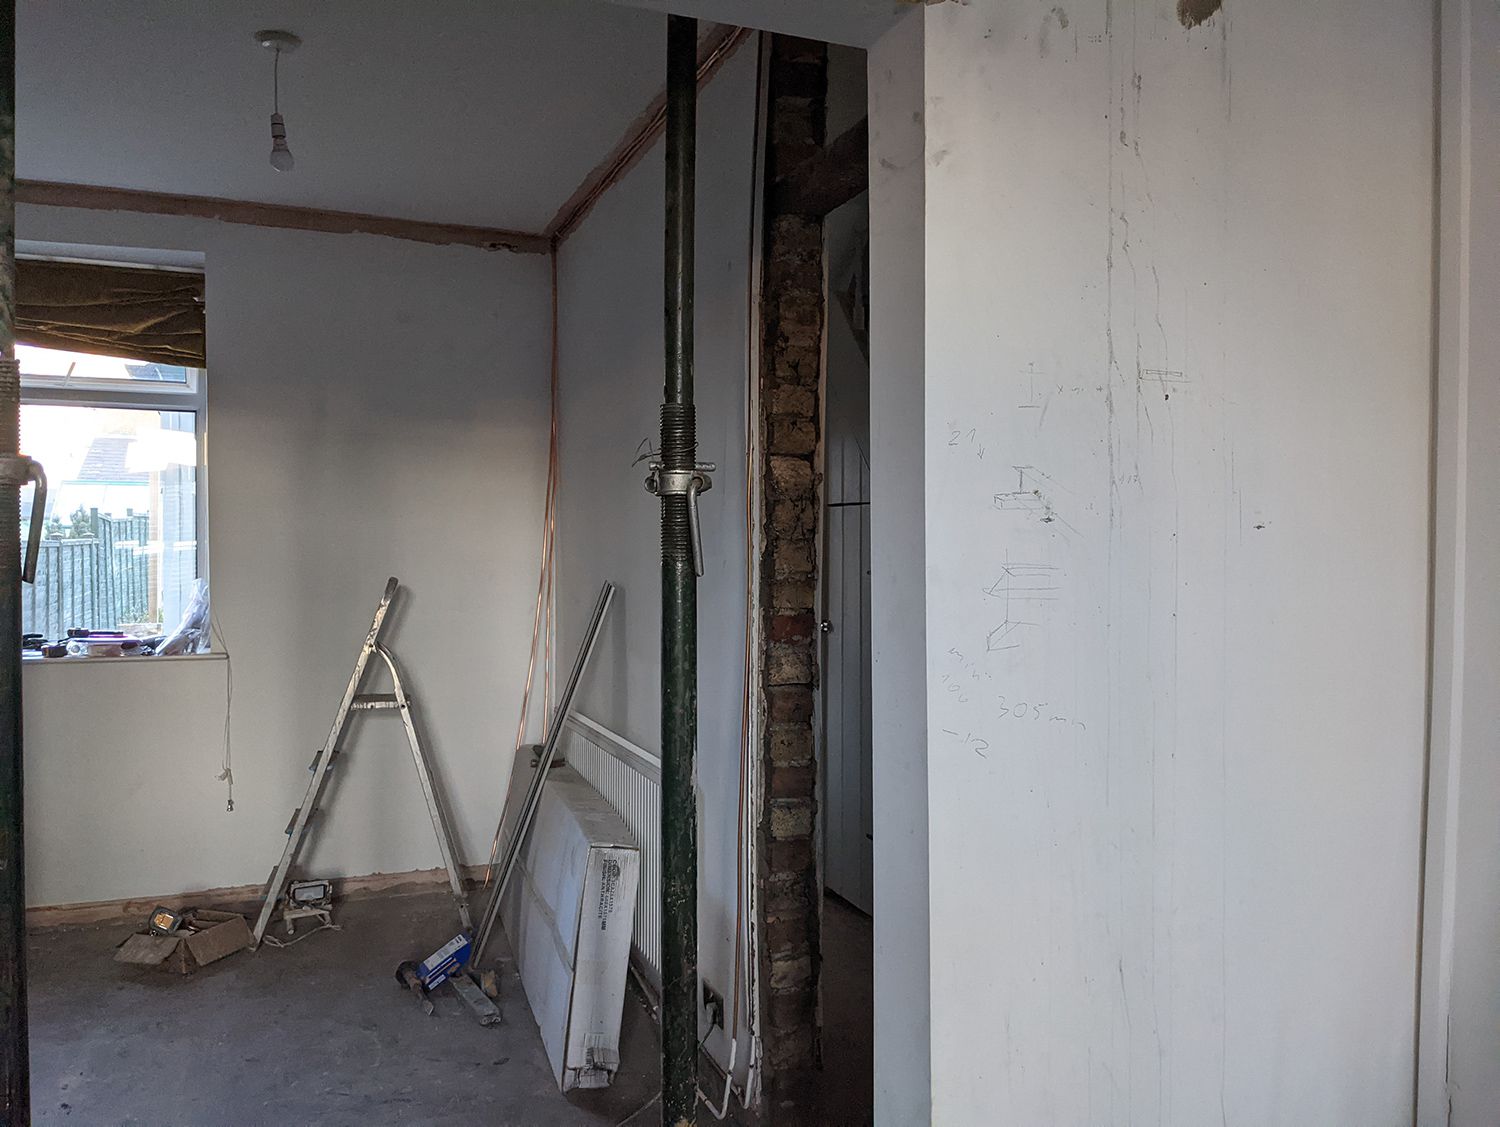 A photo of the area before the desk was built, with bare brick and a radiator along that wall. with